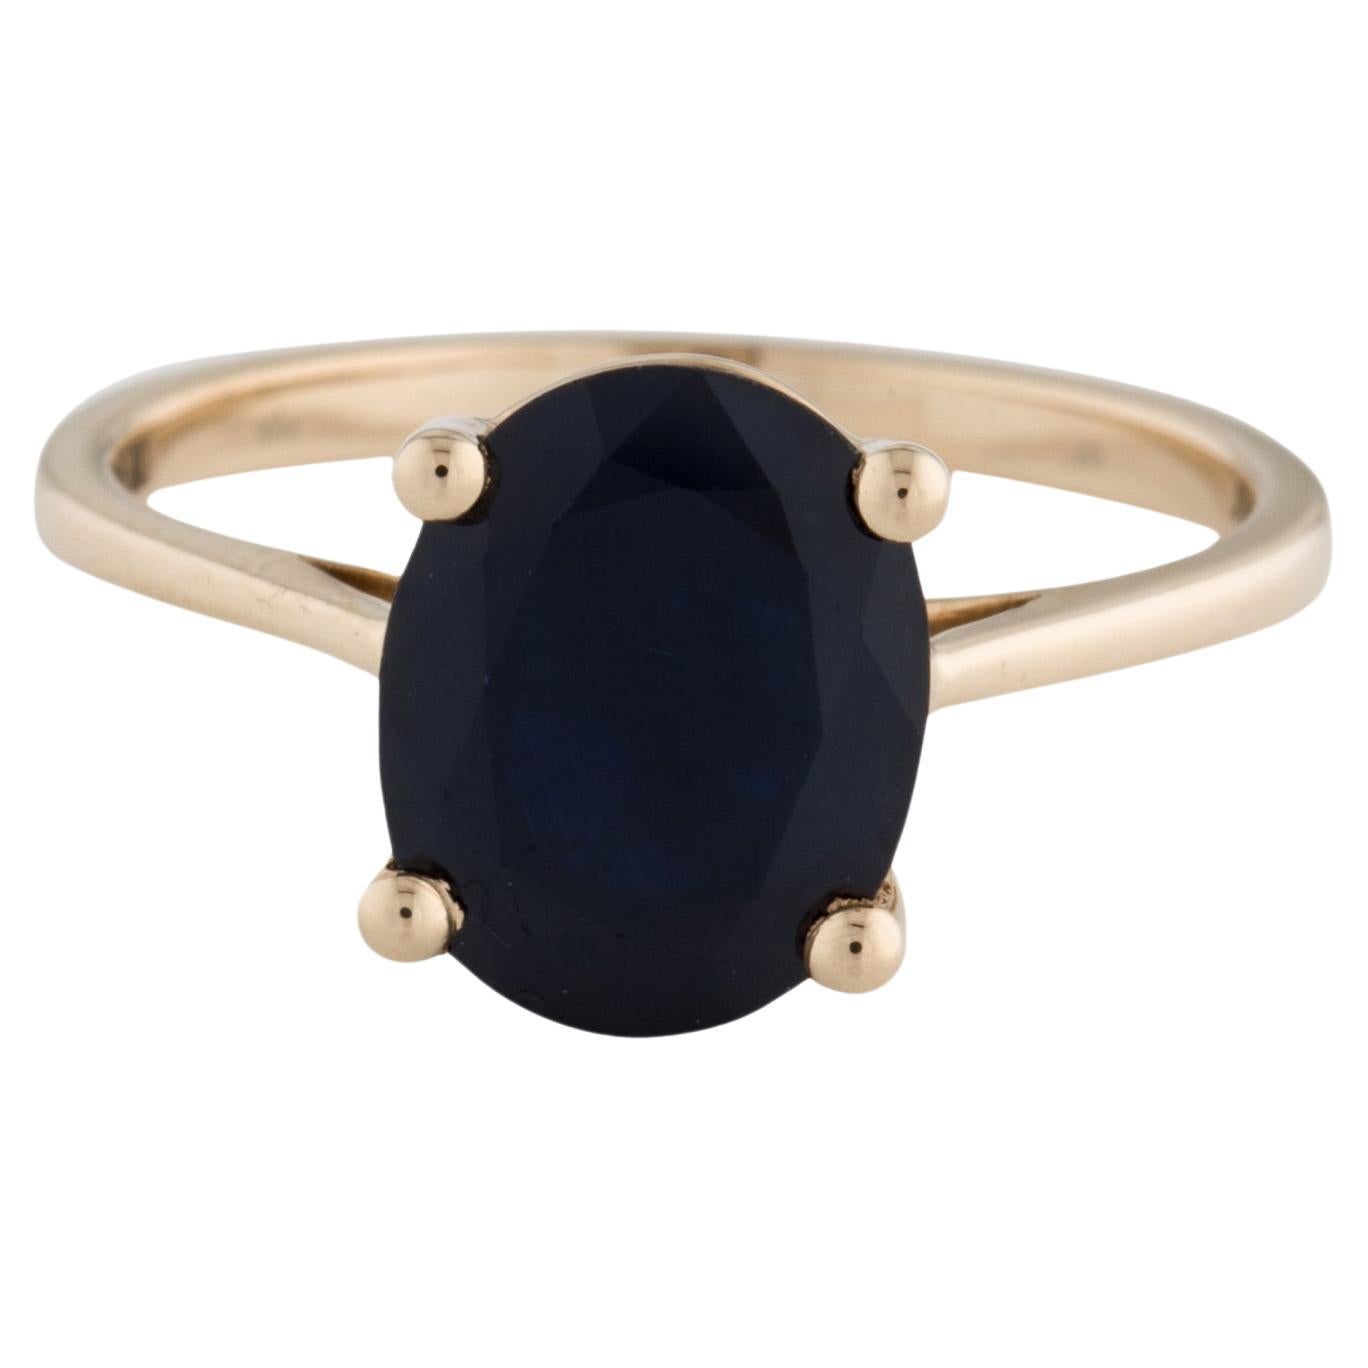 Dazzling 14K Gold 2.99ct Sapphire Cocktail Ring - Size 6.75 - Statement Jewelry For Sale